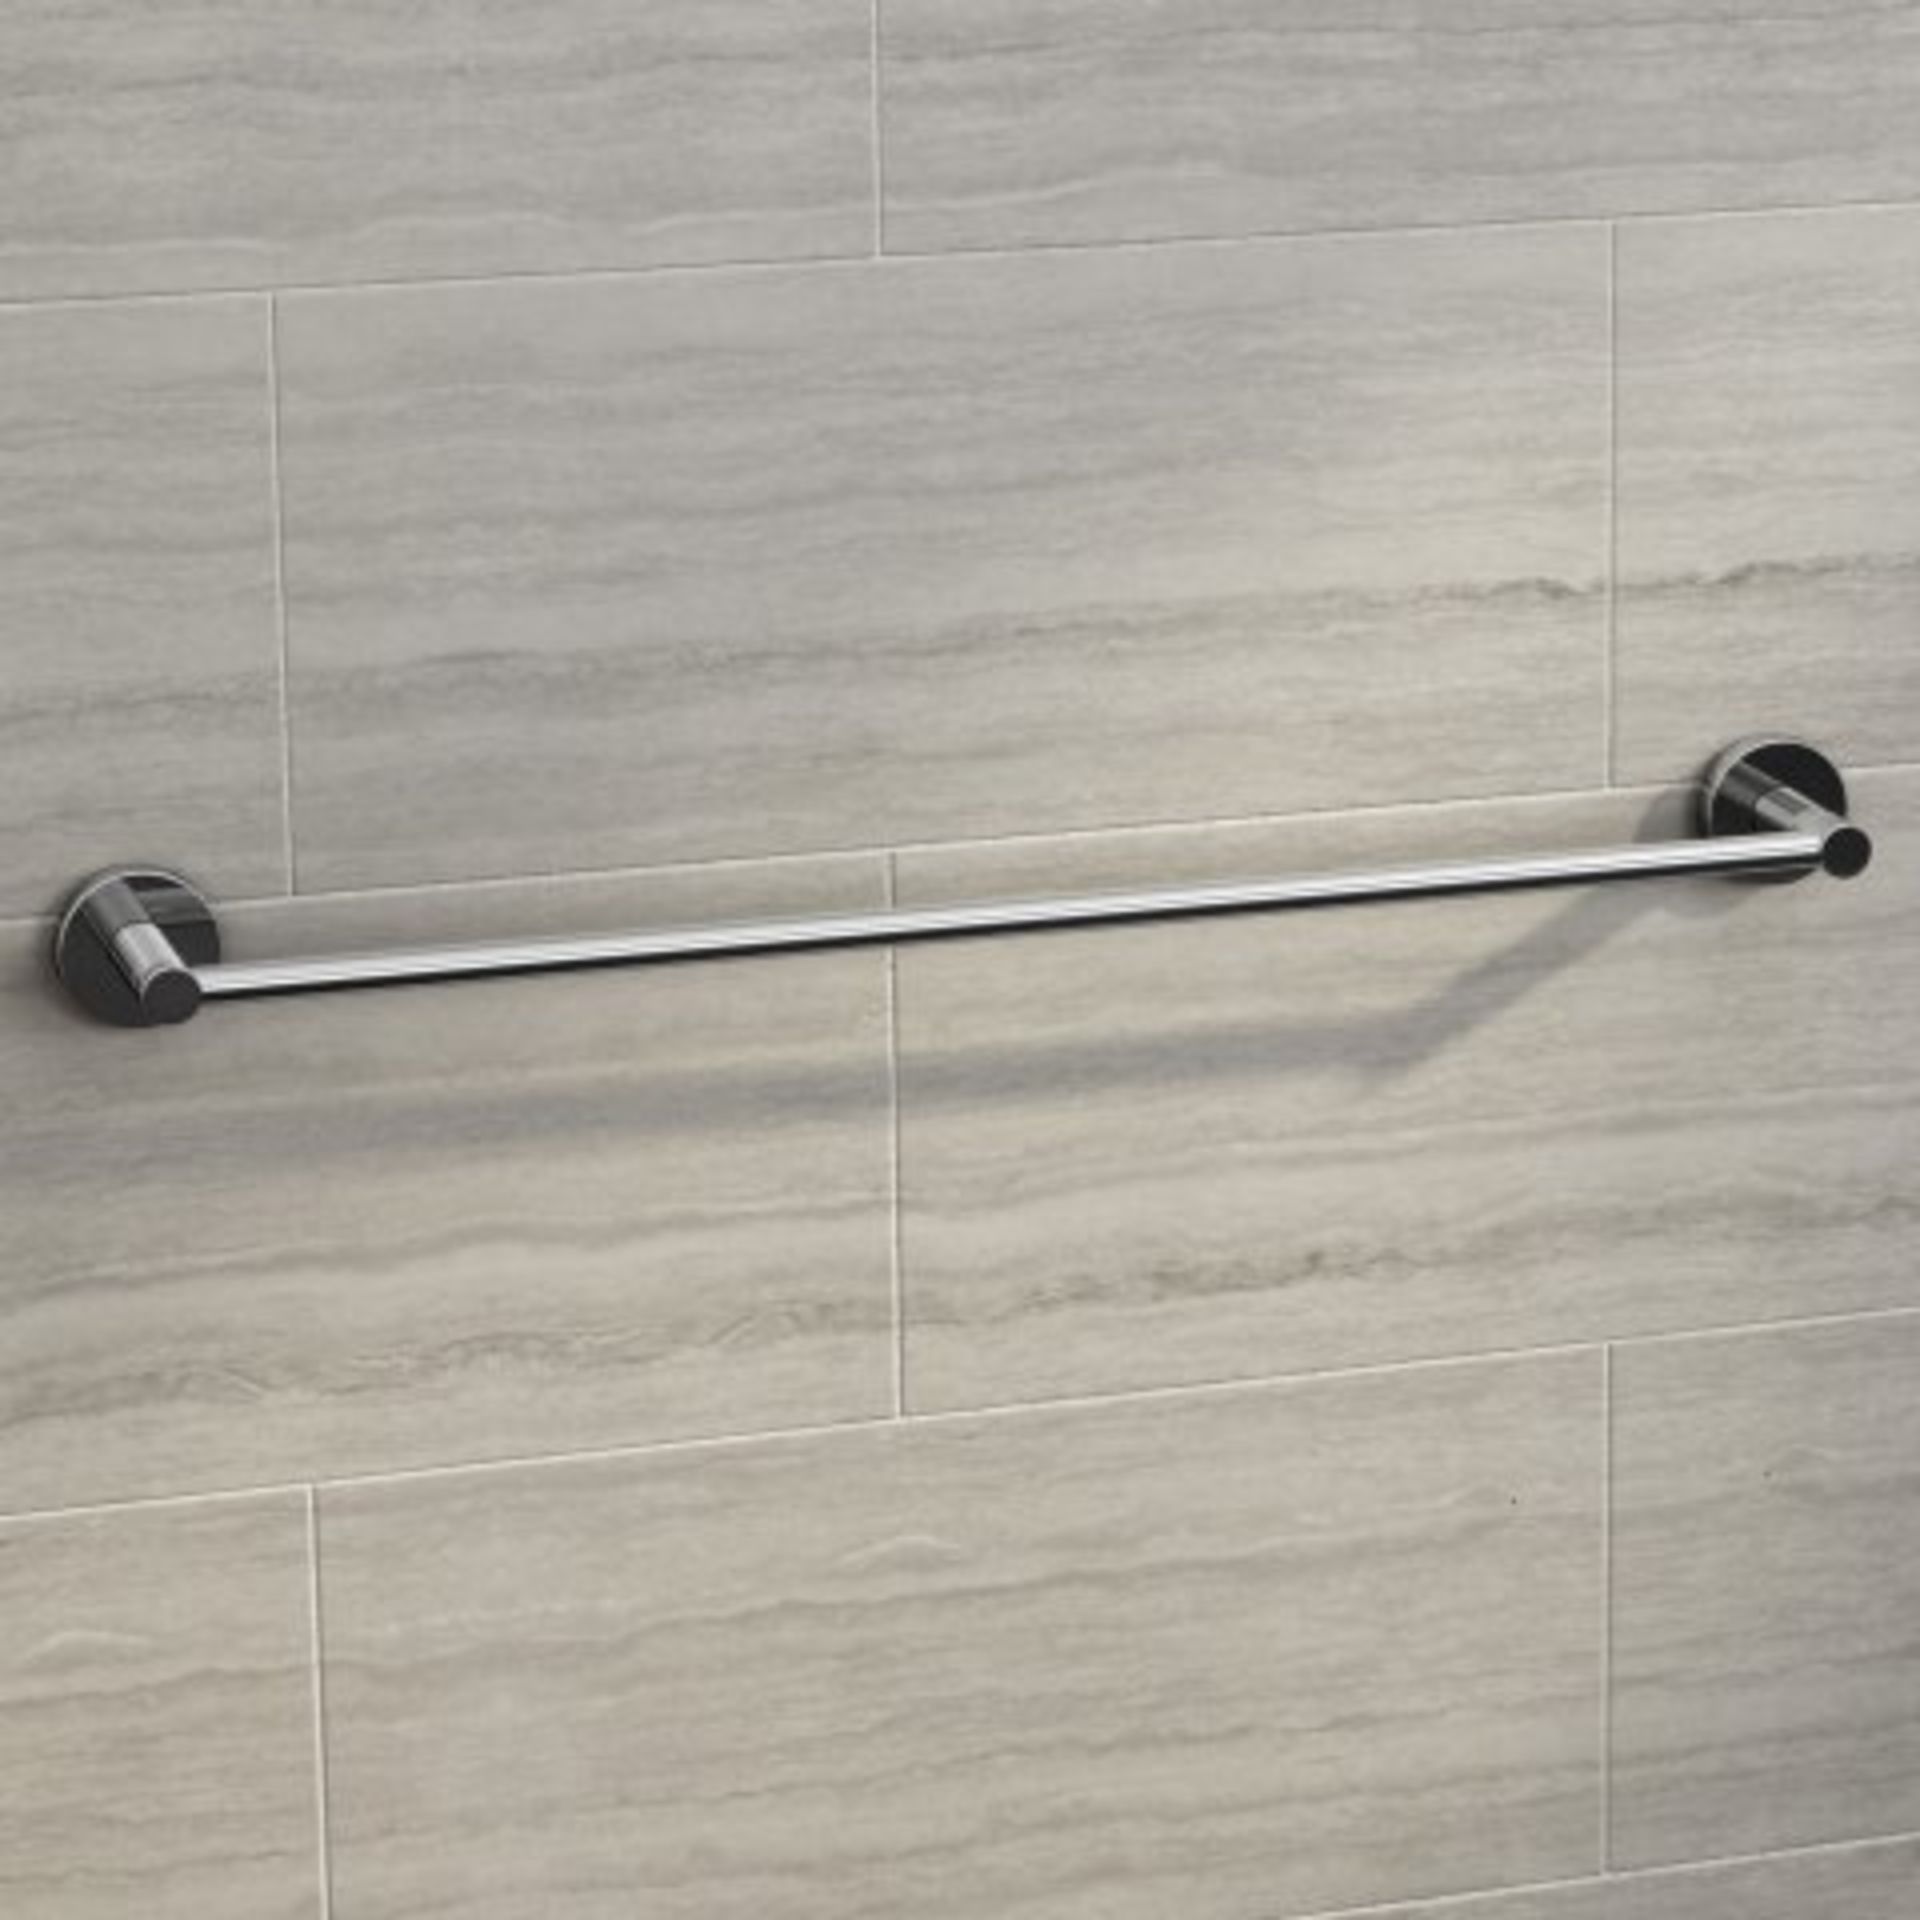 (L129) Finsbury Towel Hanger Rail Stylish and practical, this towel rail makes an excellent addition